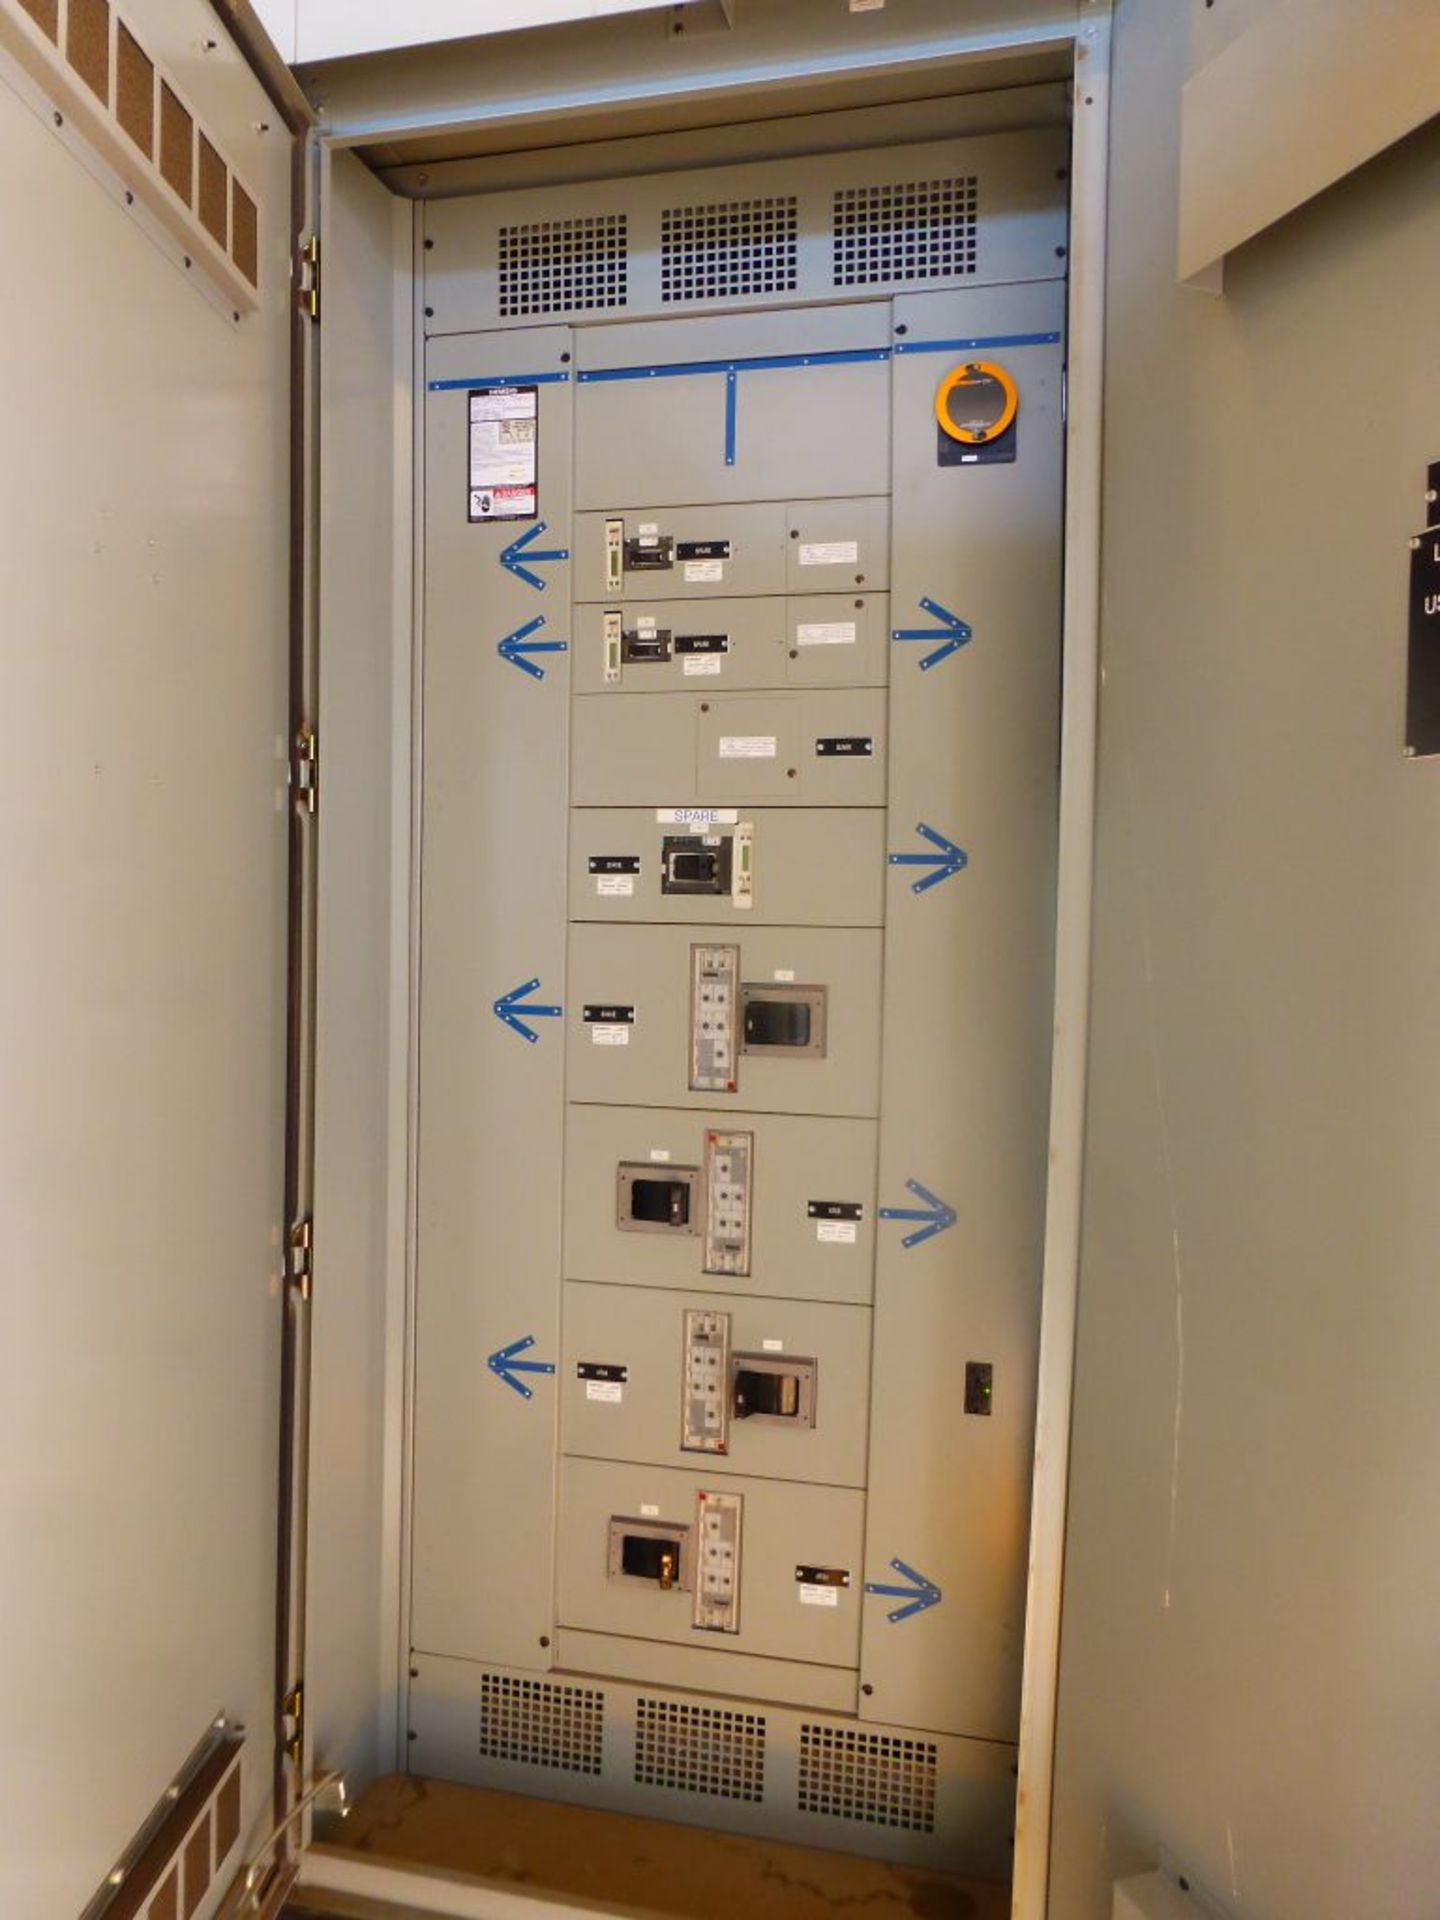 Siemens Switchgear - 4000A Breaker Suitable for Service Entrance | Lot Loading Fee: $500 | Main - Image 26 of 43